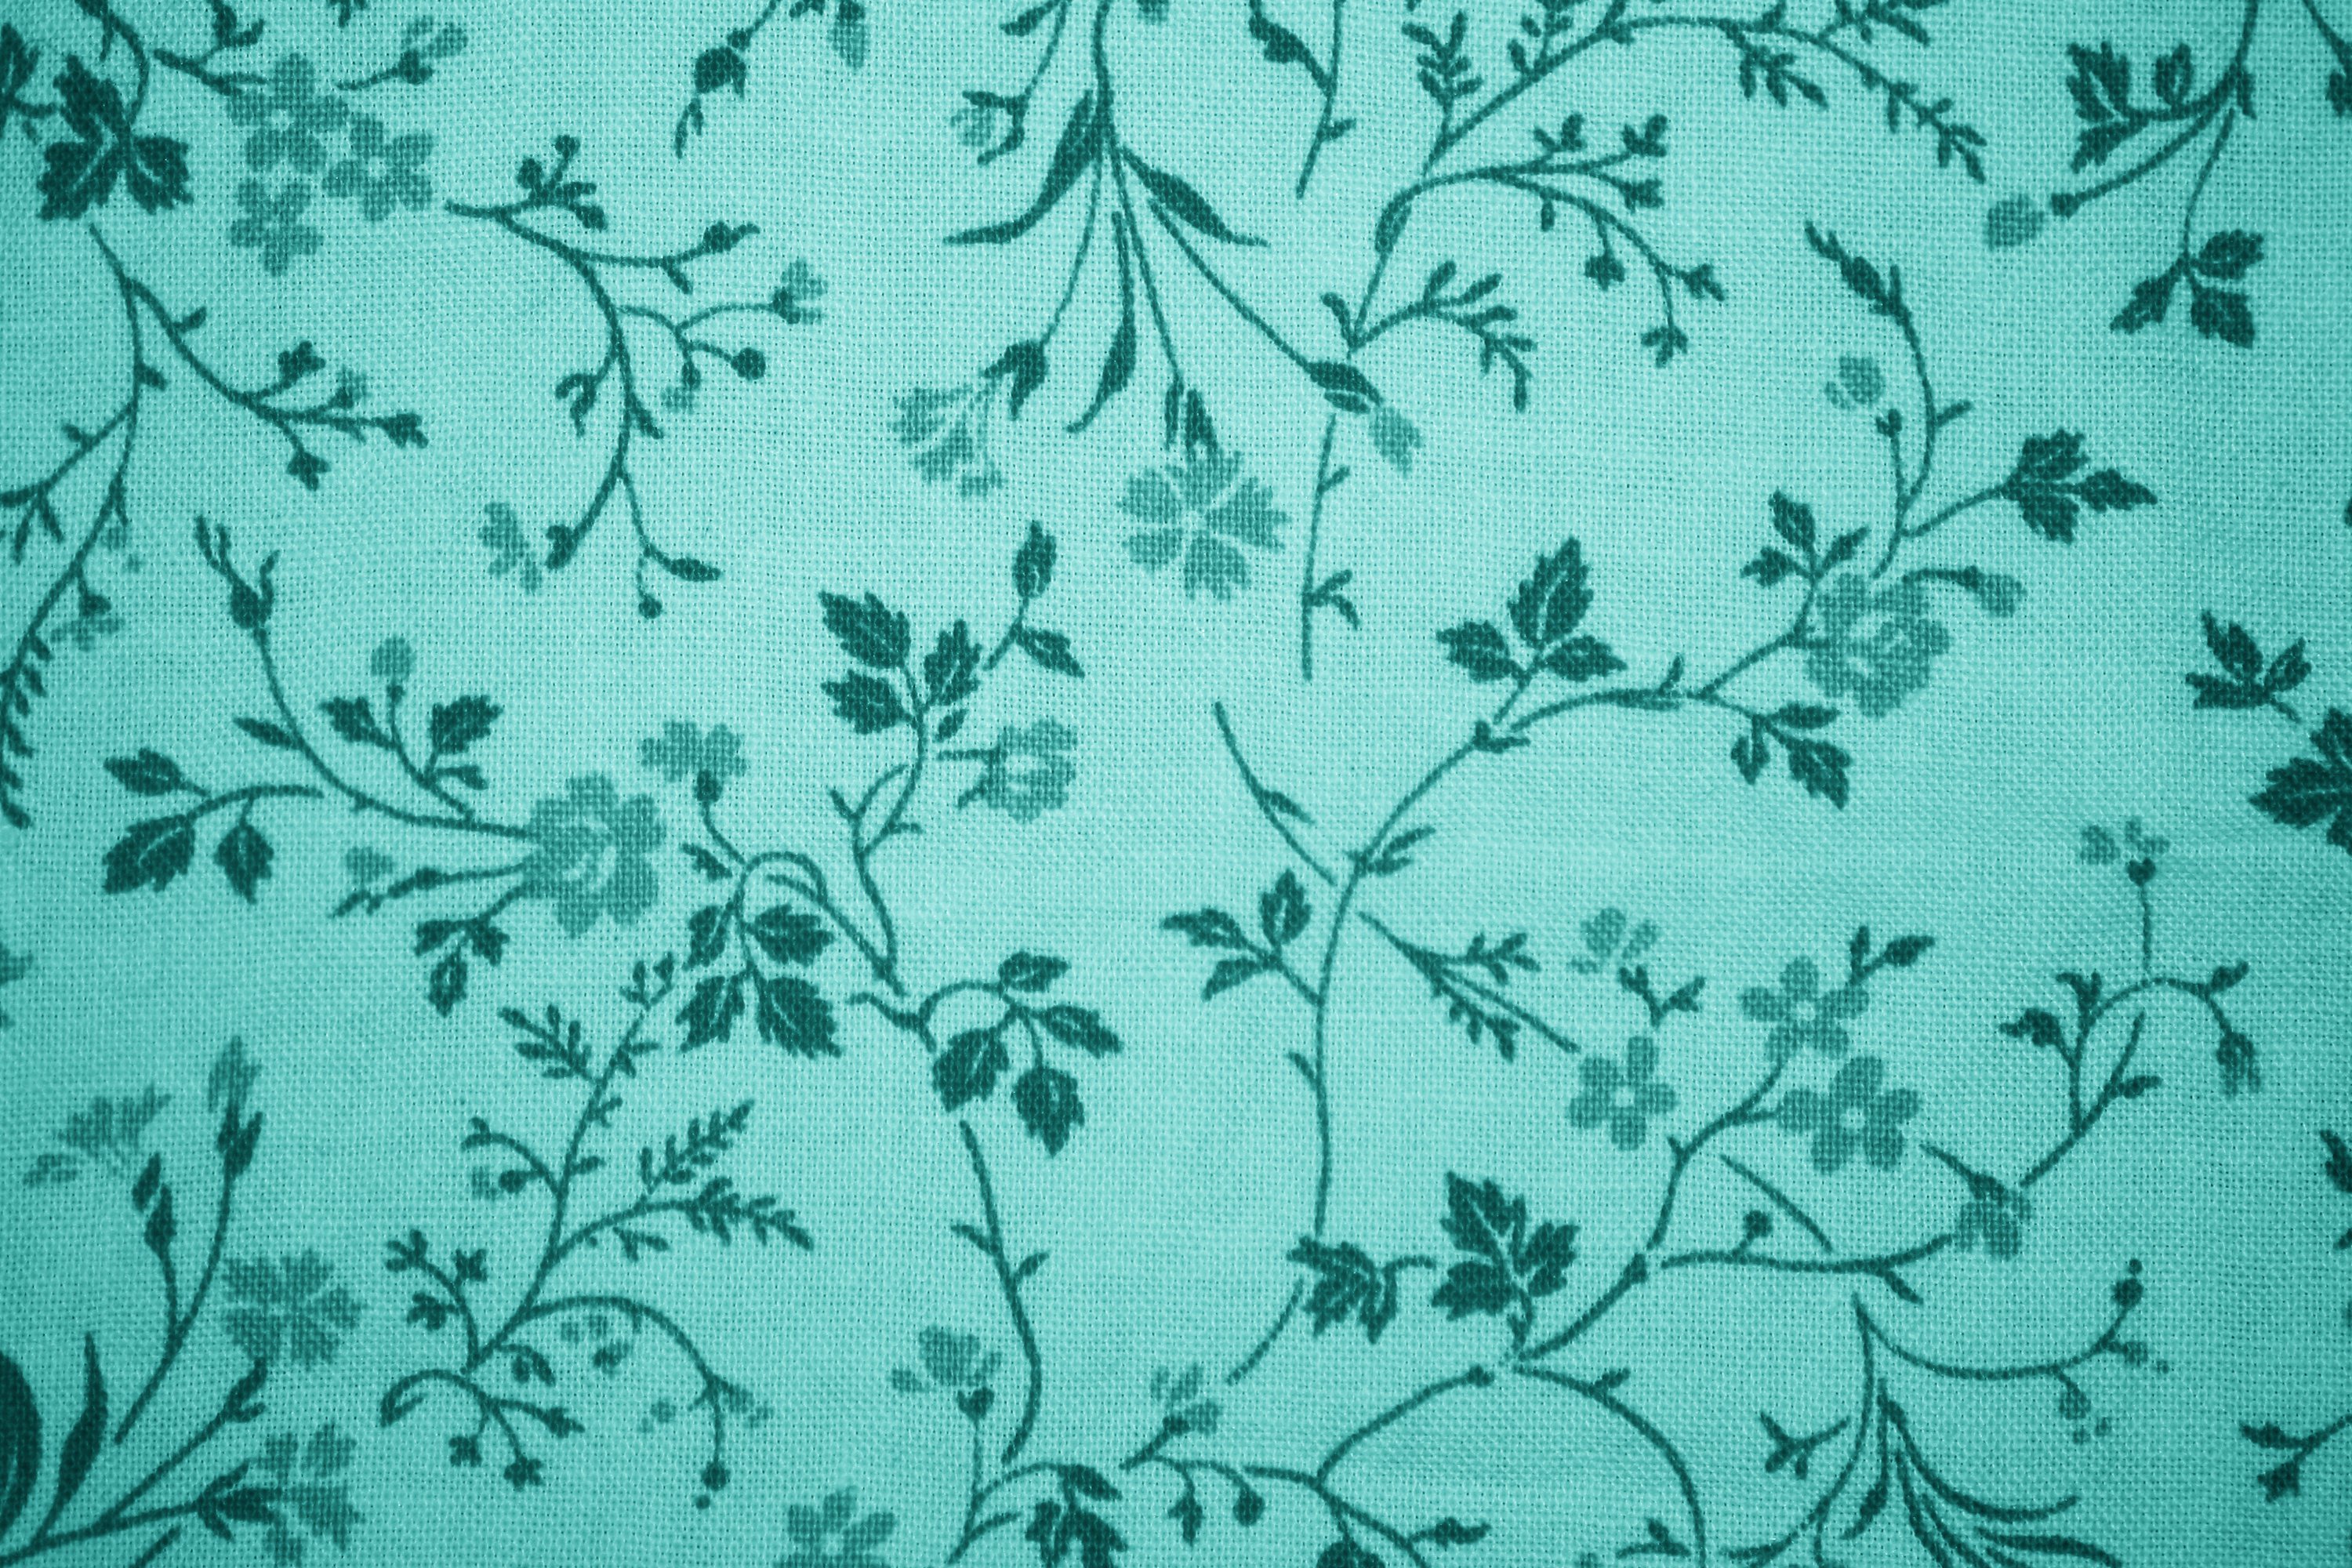 Teal Floral Print Fabric Texture Picture Free Photograph Photos